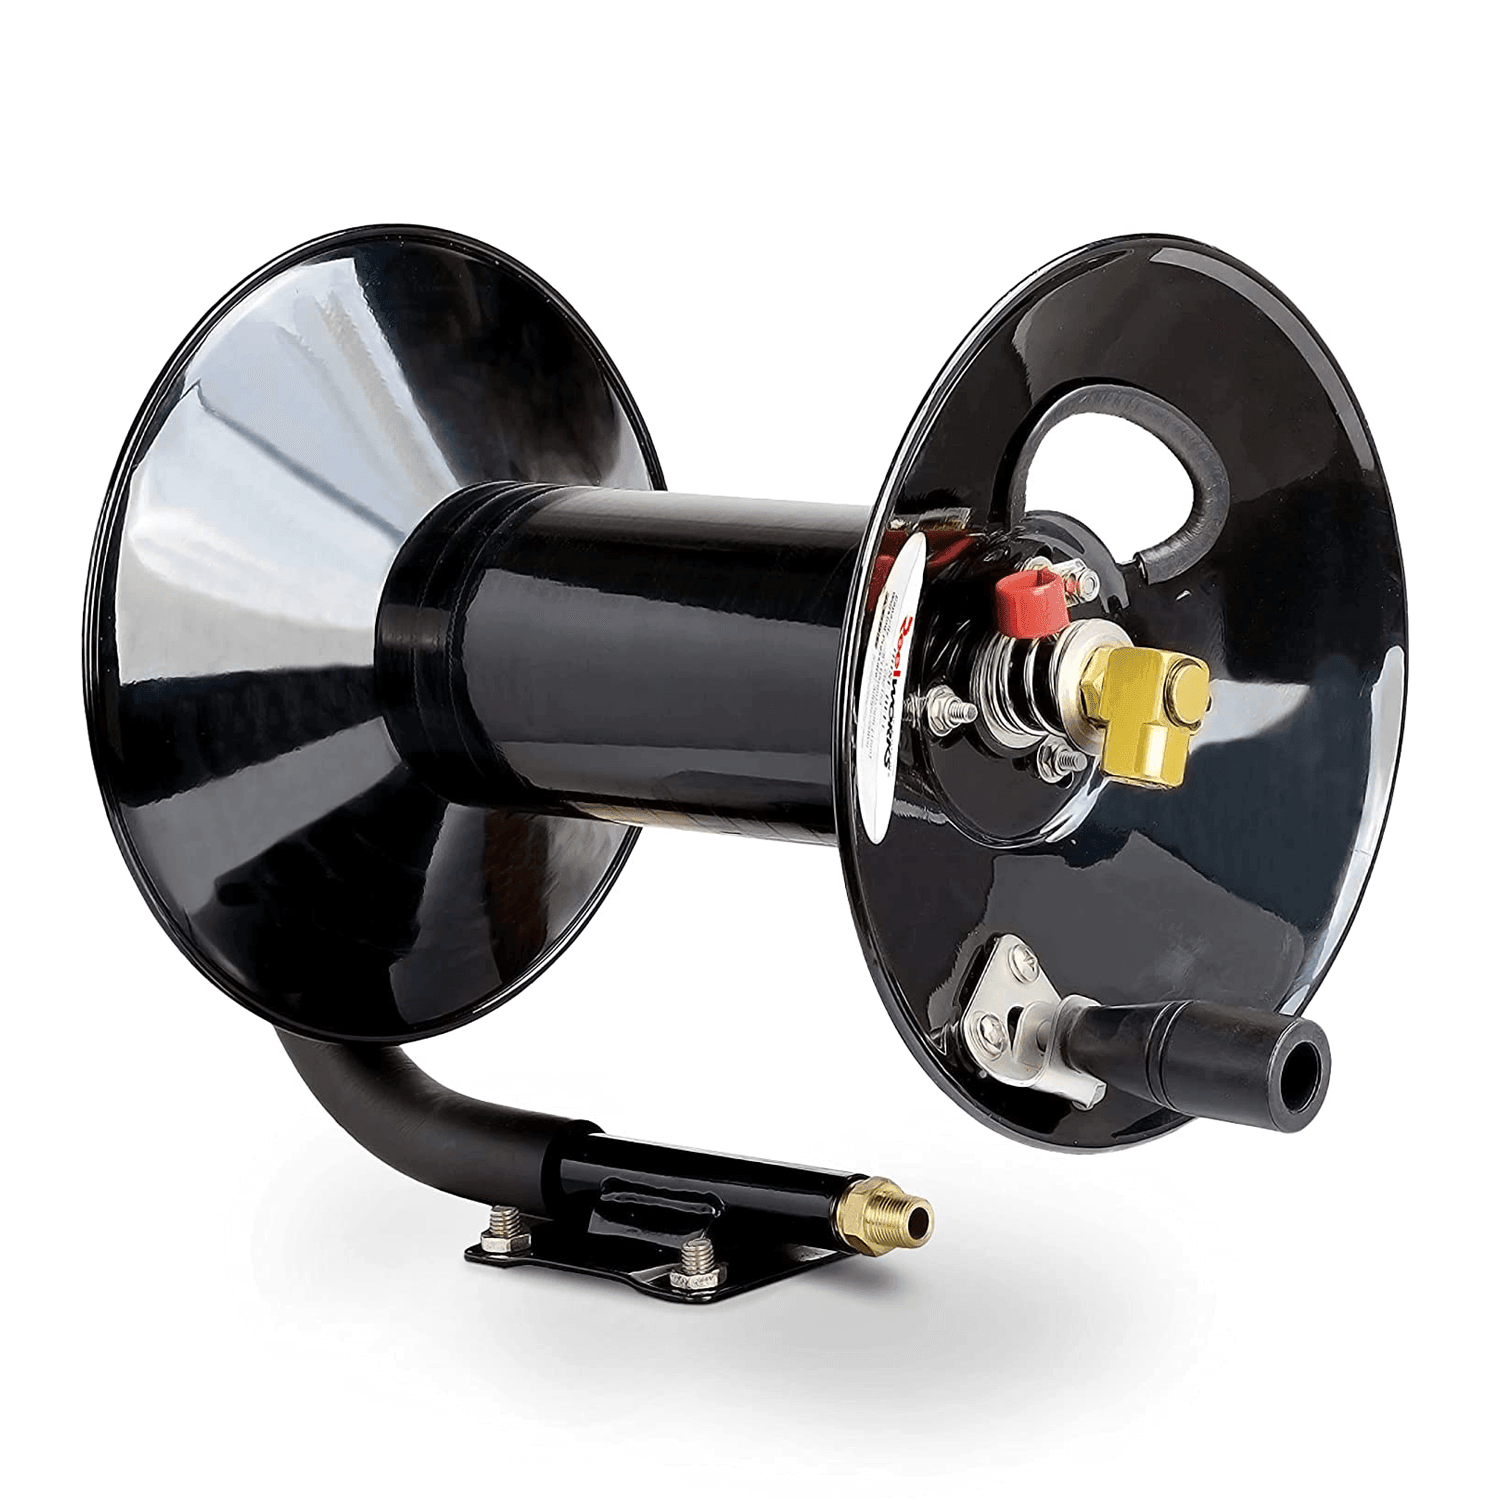 ReelWorks Mountable Manual Hose Reel Crank - Fits up to 100' Ft of 3/8" Air Hose, Max 300 PSI - DIY Tools by GreatCircleUS